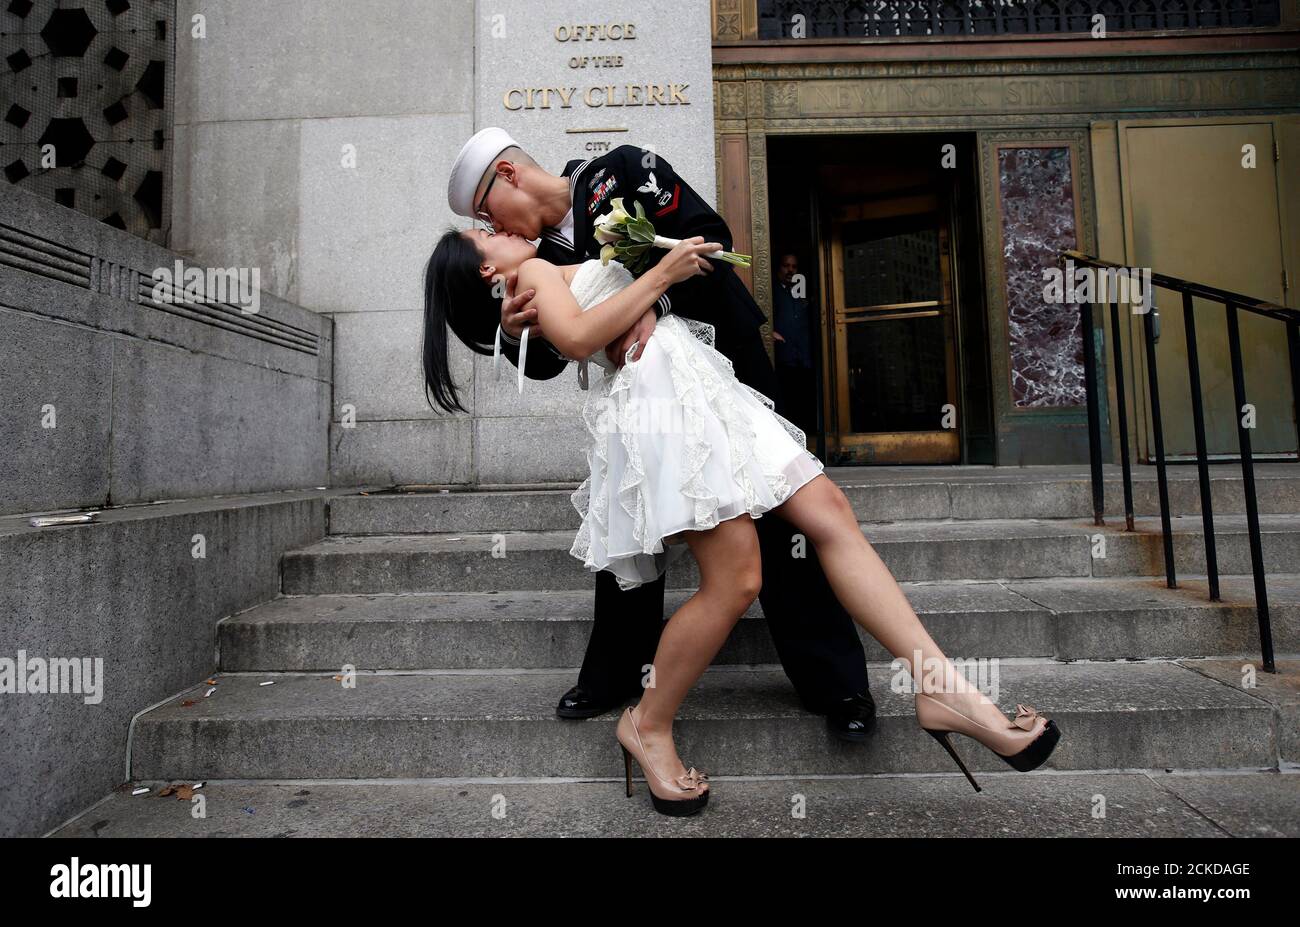 U.S. Navy Petty Officer 3rd Class EO3 John Chen, 23, from Lakehurst, New Jersey, kisses his new bride Victoria Chan, 25, from Manhattan, as they pose for photographers after they were married in a civil ceremony at New York City's Office of the City Clerk December 12, 2012. Hundreds of couples packed the office in lower Manhattan to be married on the date 12/12/12 as this will be the last such triple date for almost a century until January 1, 2101.  REUTERS/Mike Segar    (UNITED STATES - Tags: SOCIETY PORTRAIT) Stock Photo